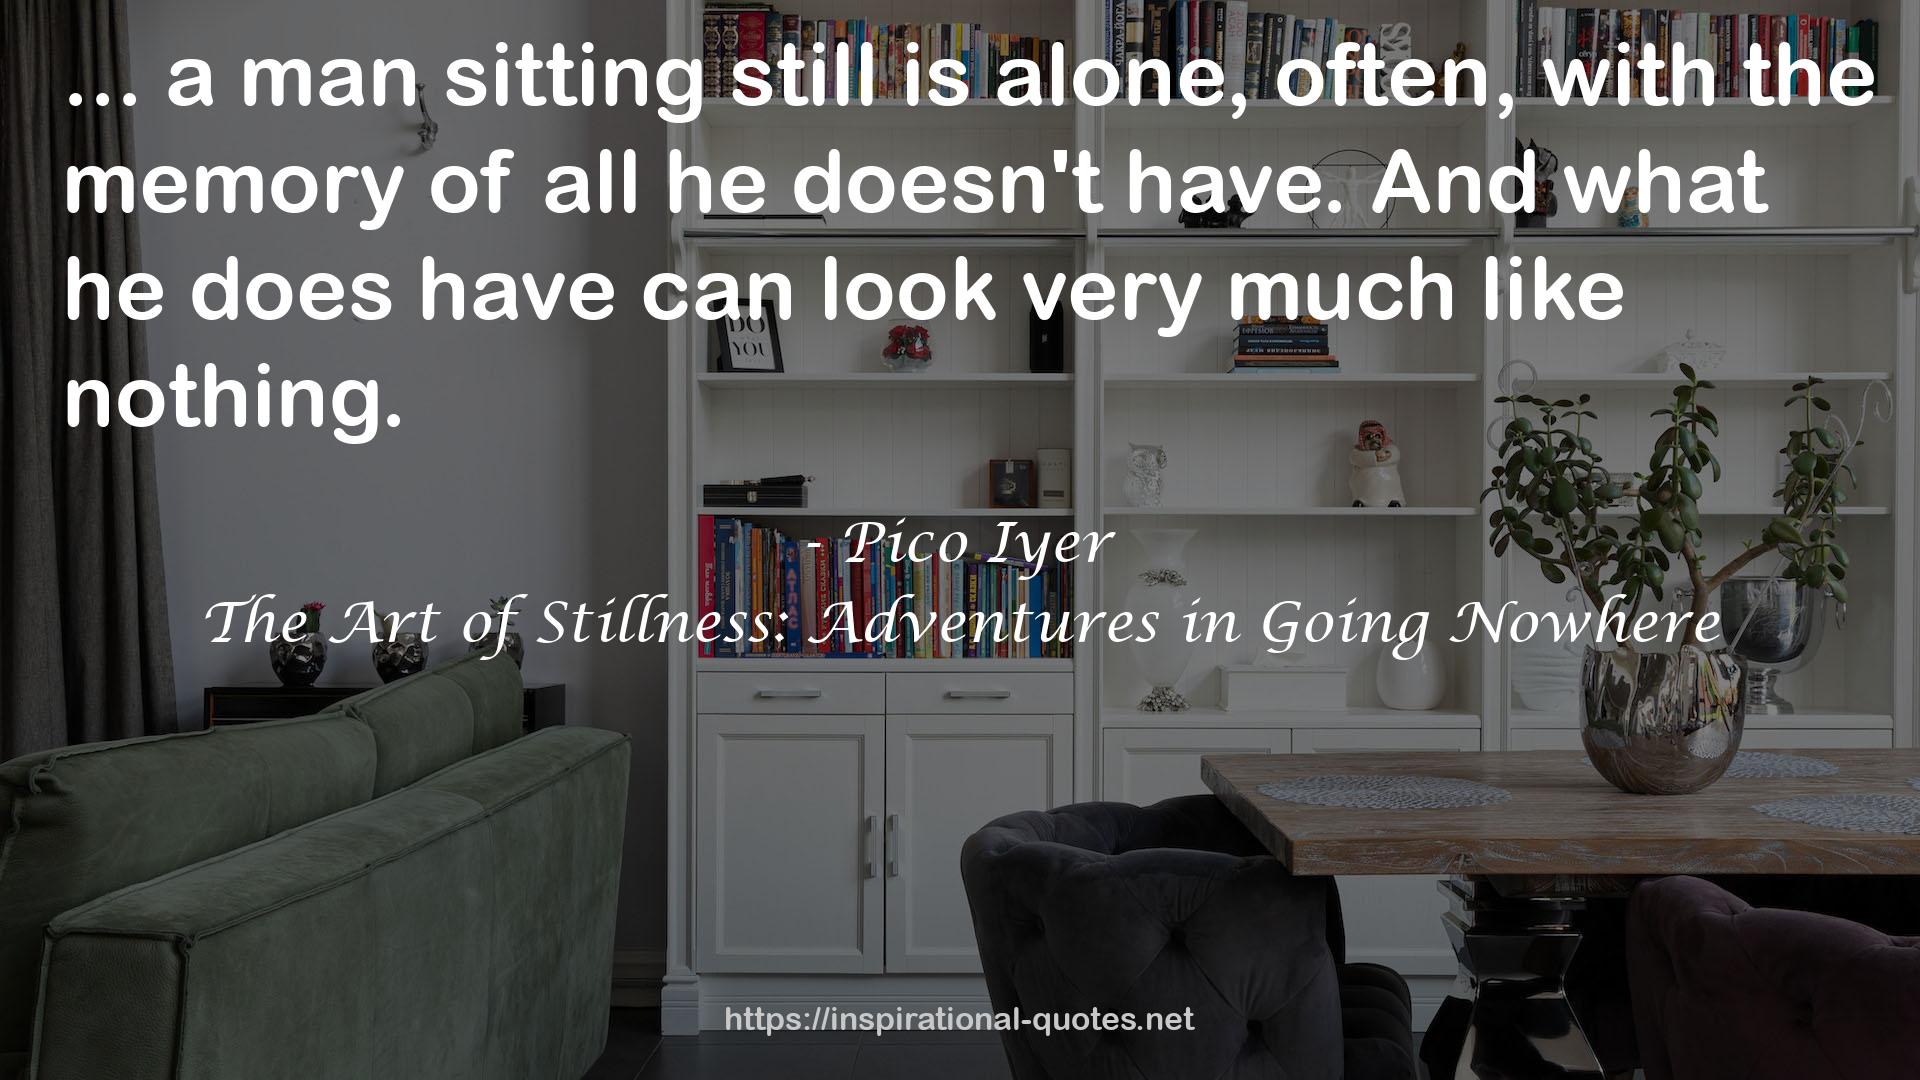 The Art of Stillness: Adventures in Going Nowhere QUOTES